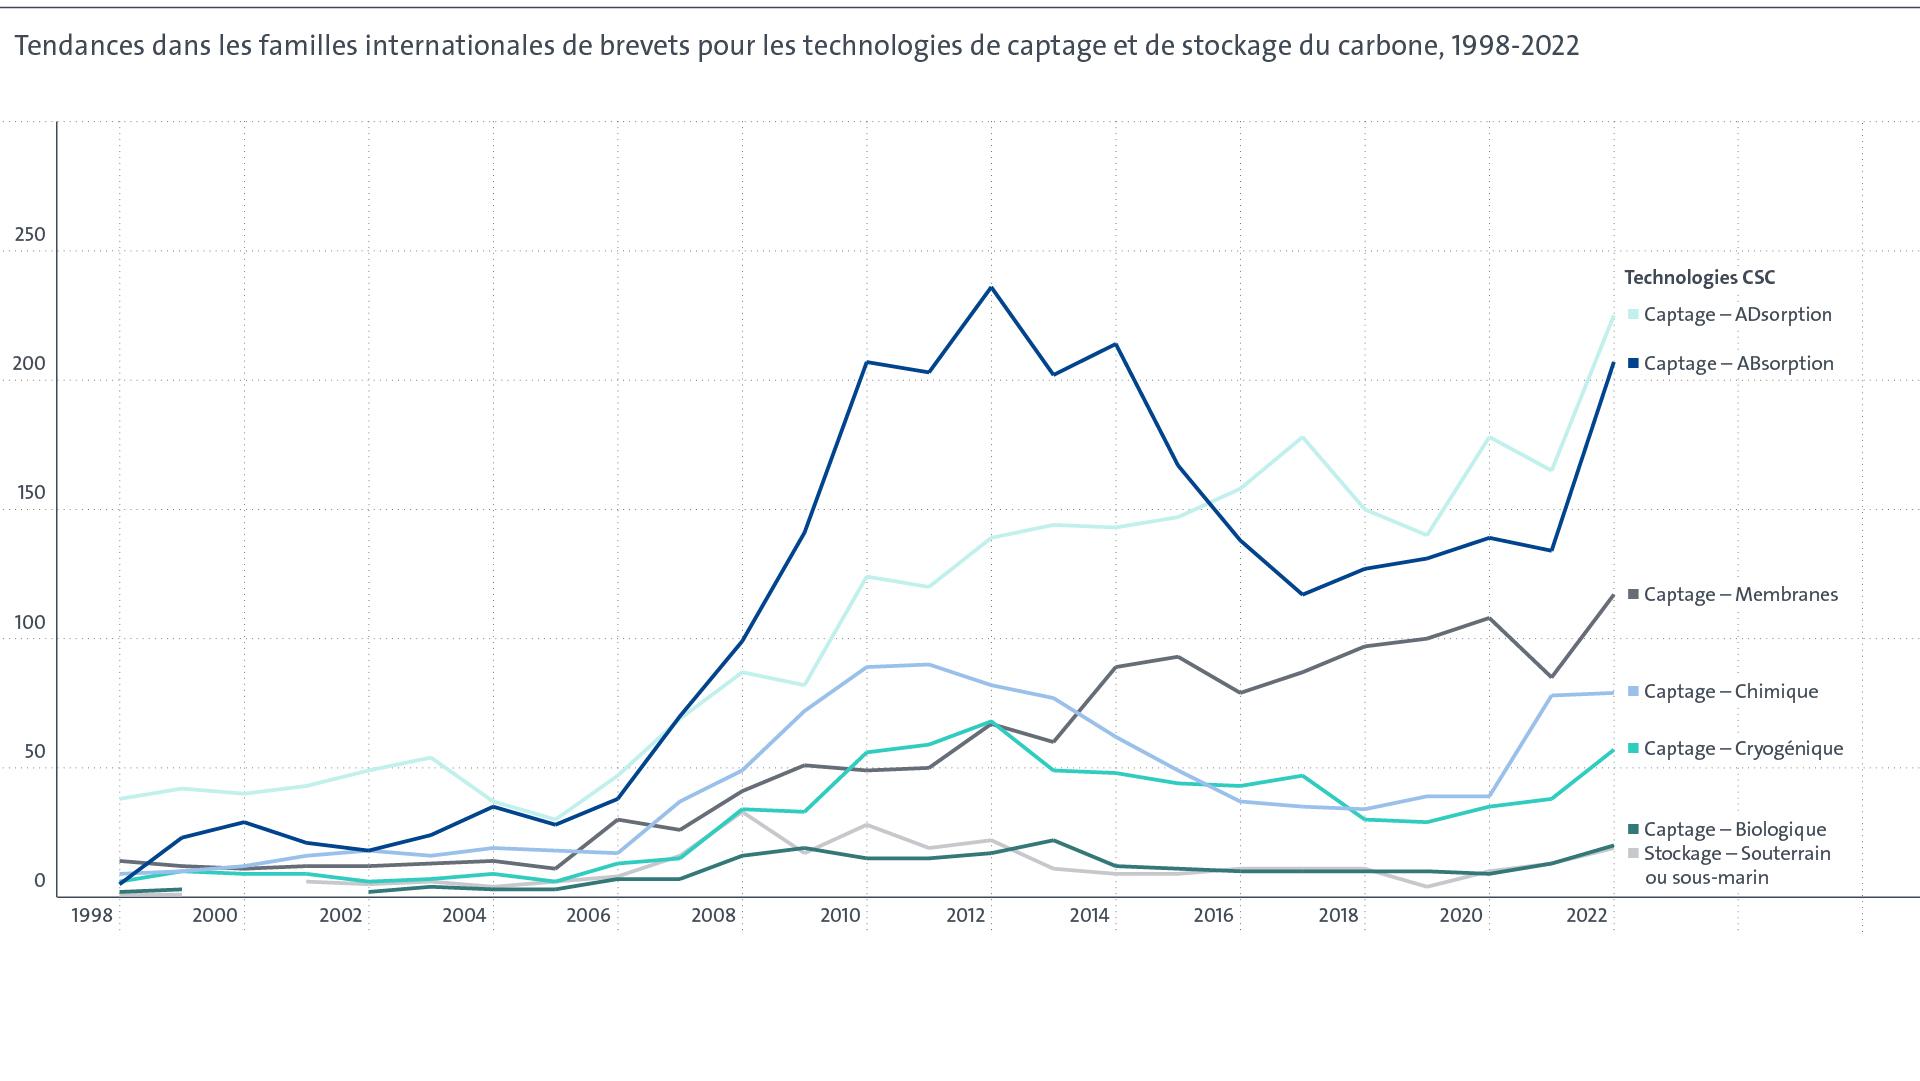 Chart showing carbon capture and storage technologies from 1998-2022, major rise in 2008-2014, and again in 2022